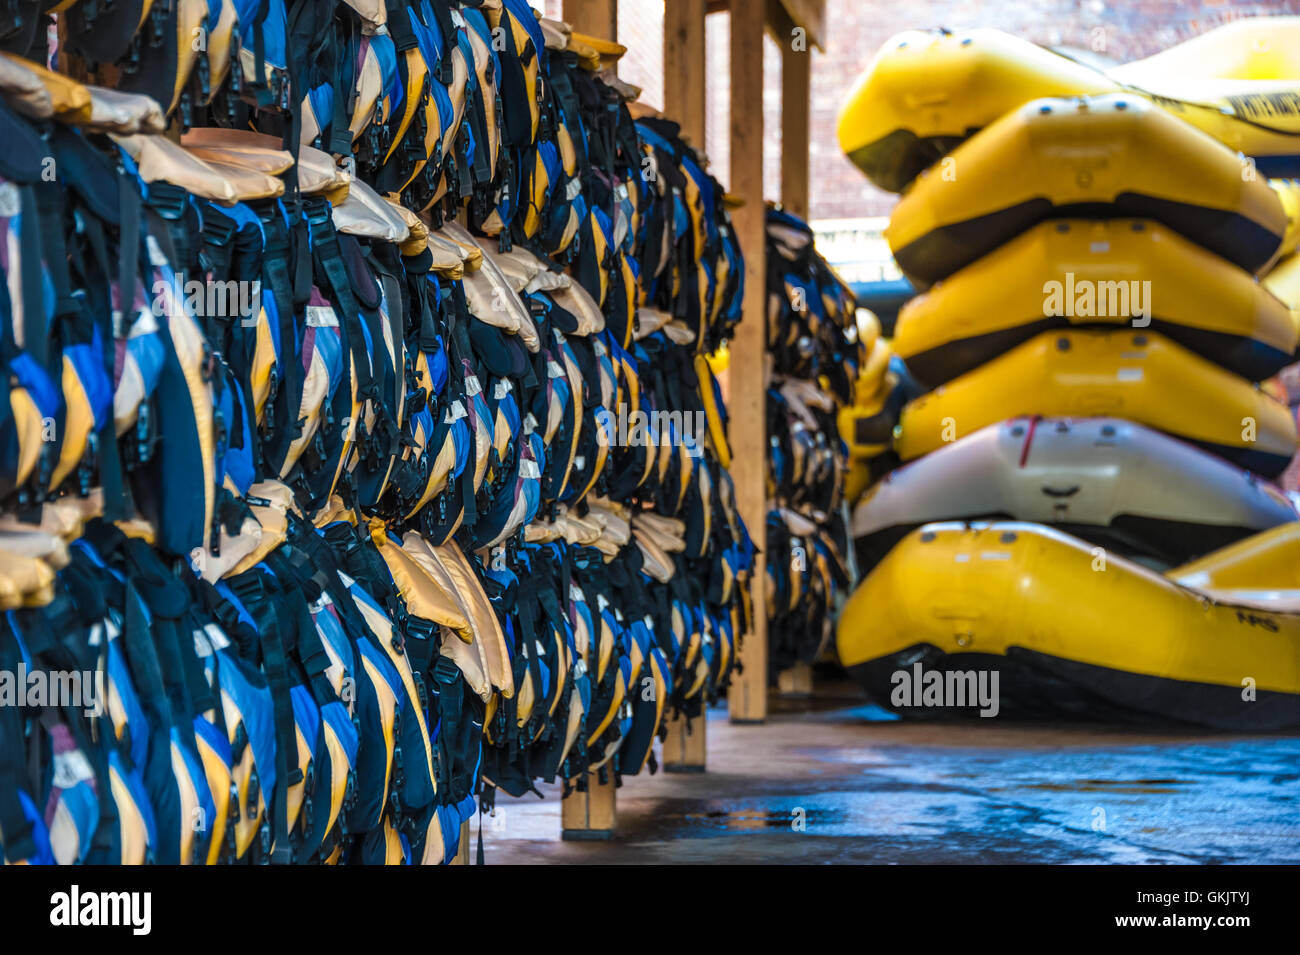 Life vests and rubber rafts ready for whitewater rafting action in Columbus, Georgia on the Chattahoochee River. (USA) Stock Photo